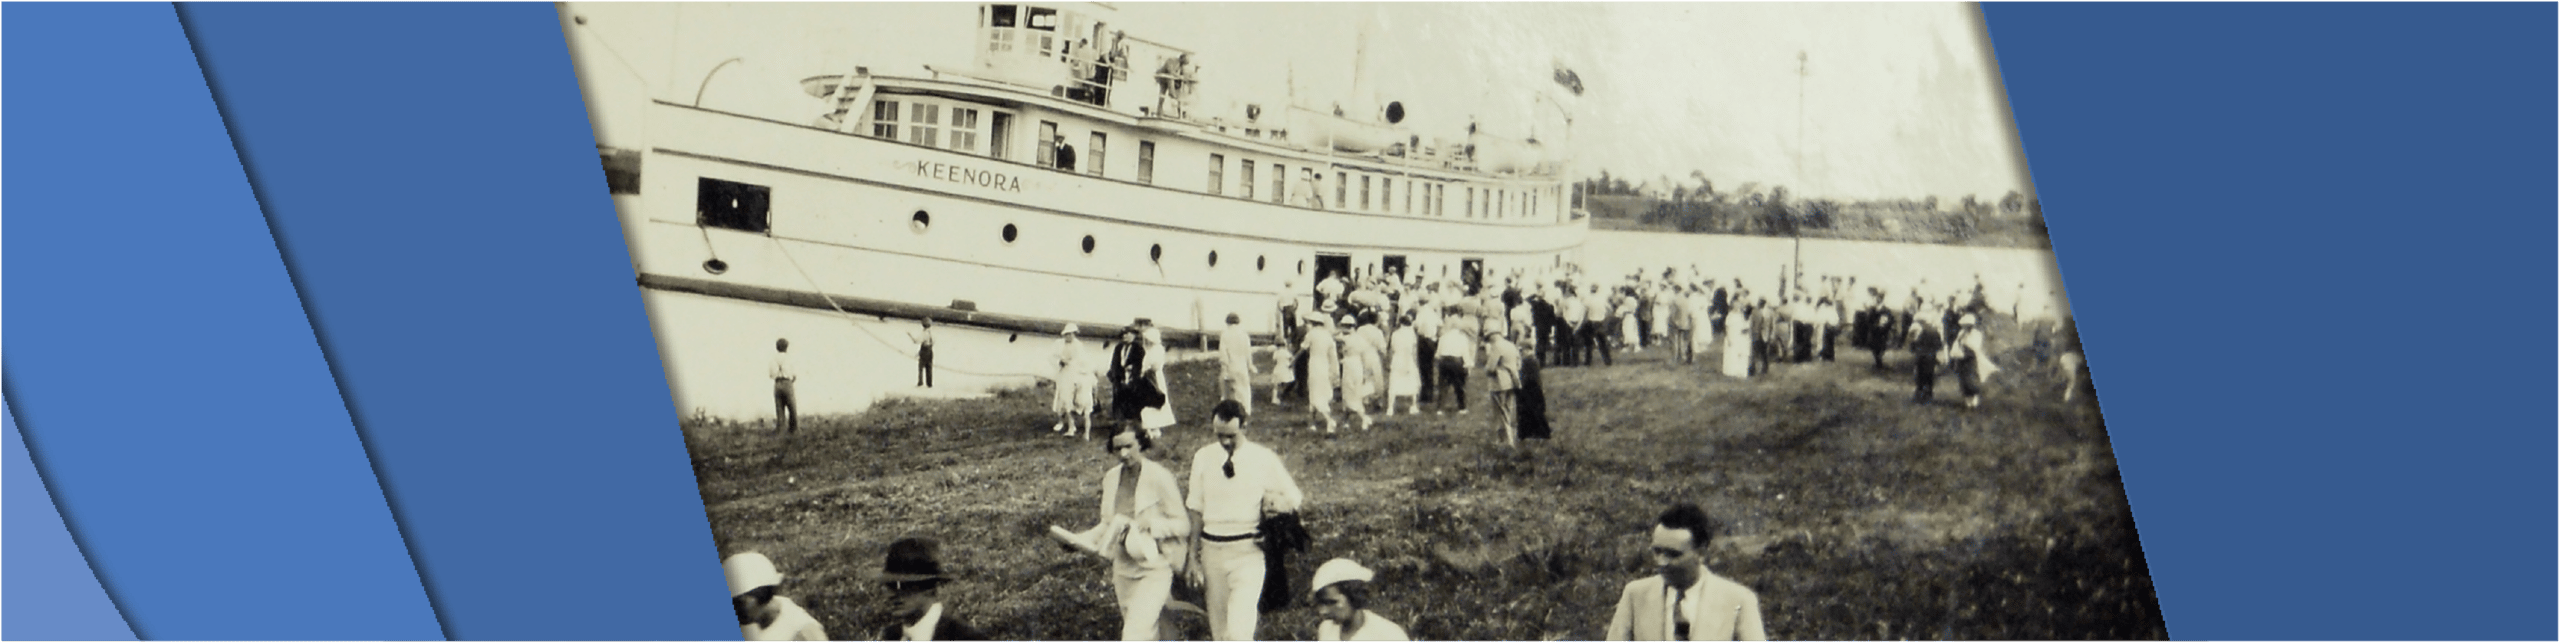 Photo shows passengers getting off of the SS Keenora onto land. 